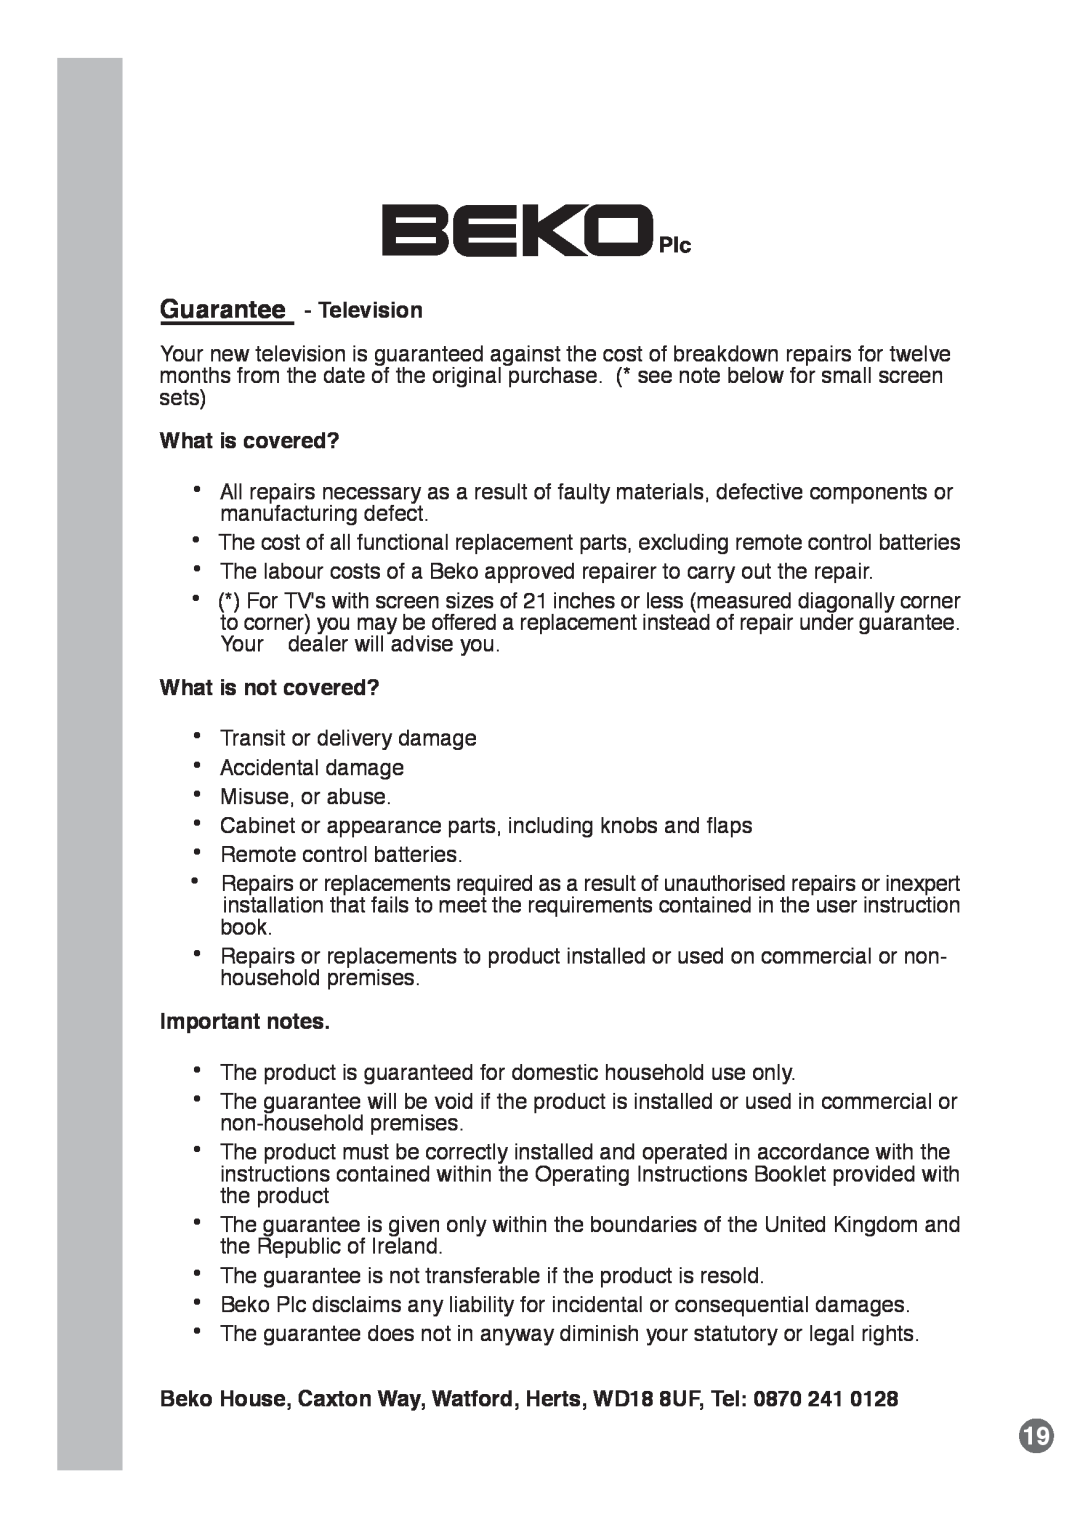 Beko E1 manual Guarantee - Television, What is covered?, What is not covered?, Important notes 